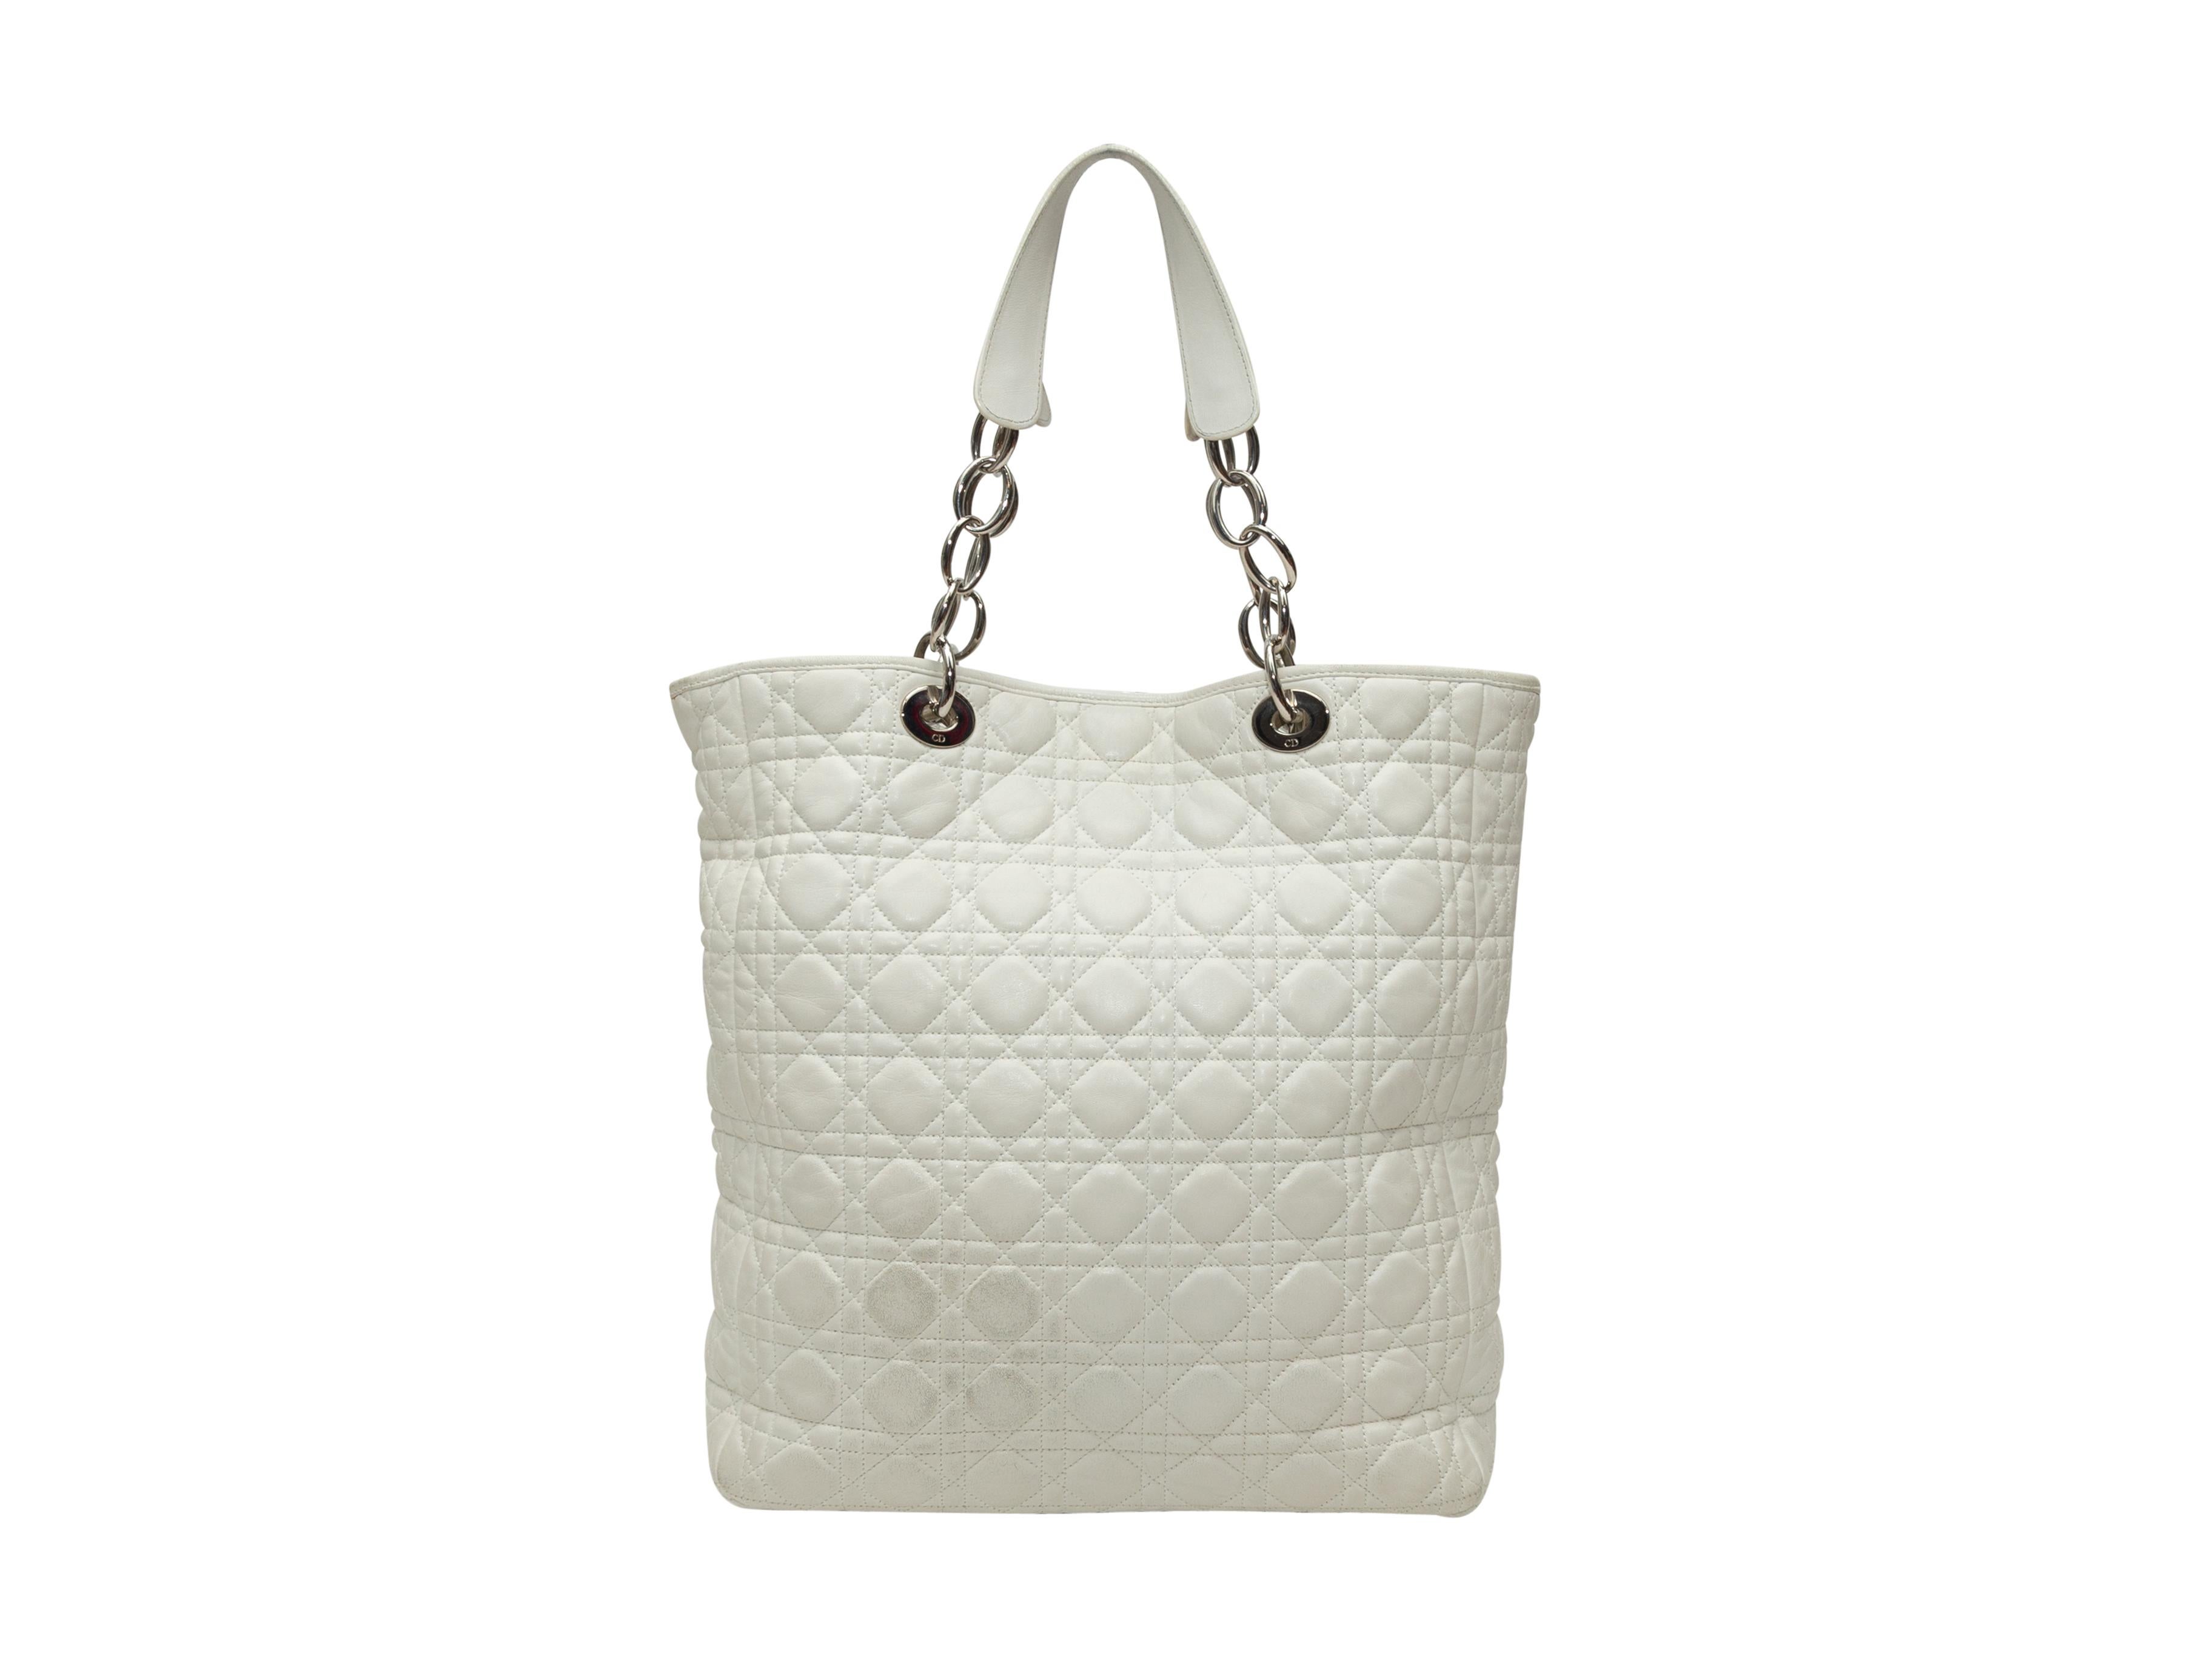 christian dior white and gold tote